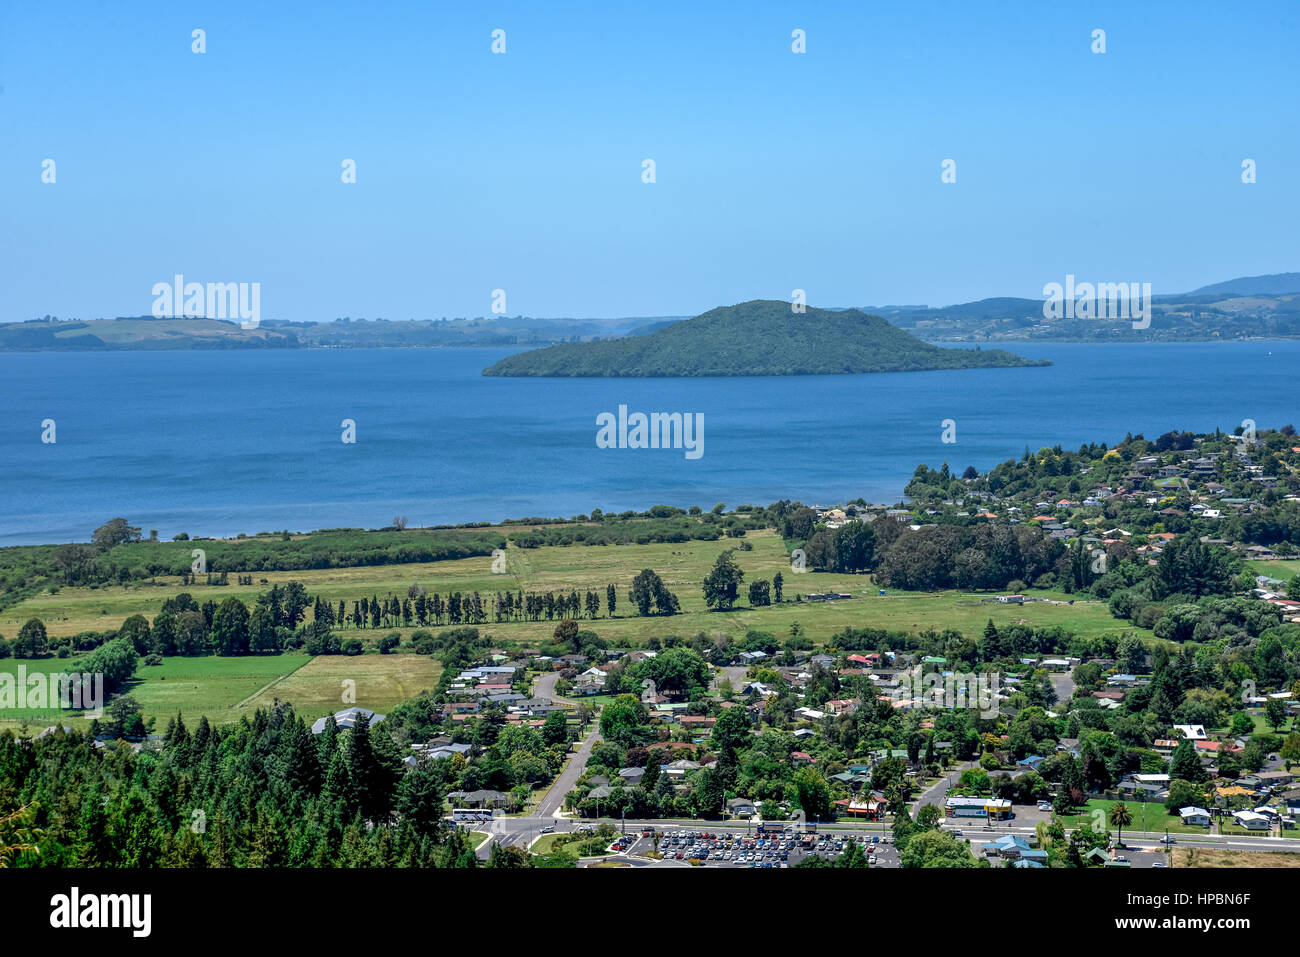 A view of Lake Rotorua with island and a city, New Zealand, North Island Stock Photo